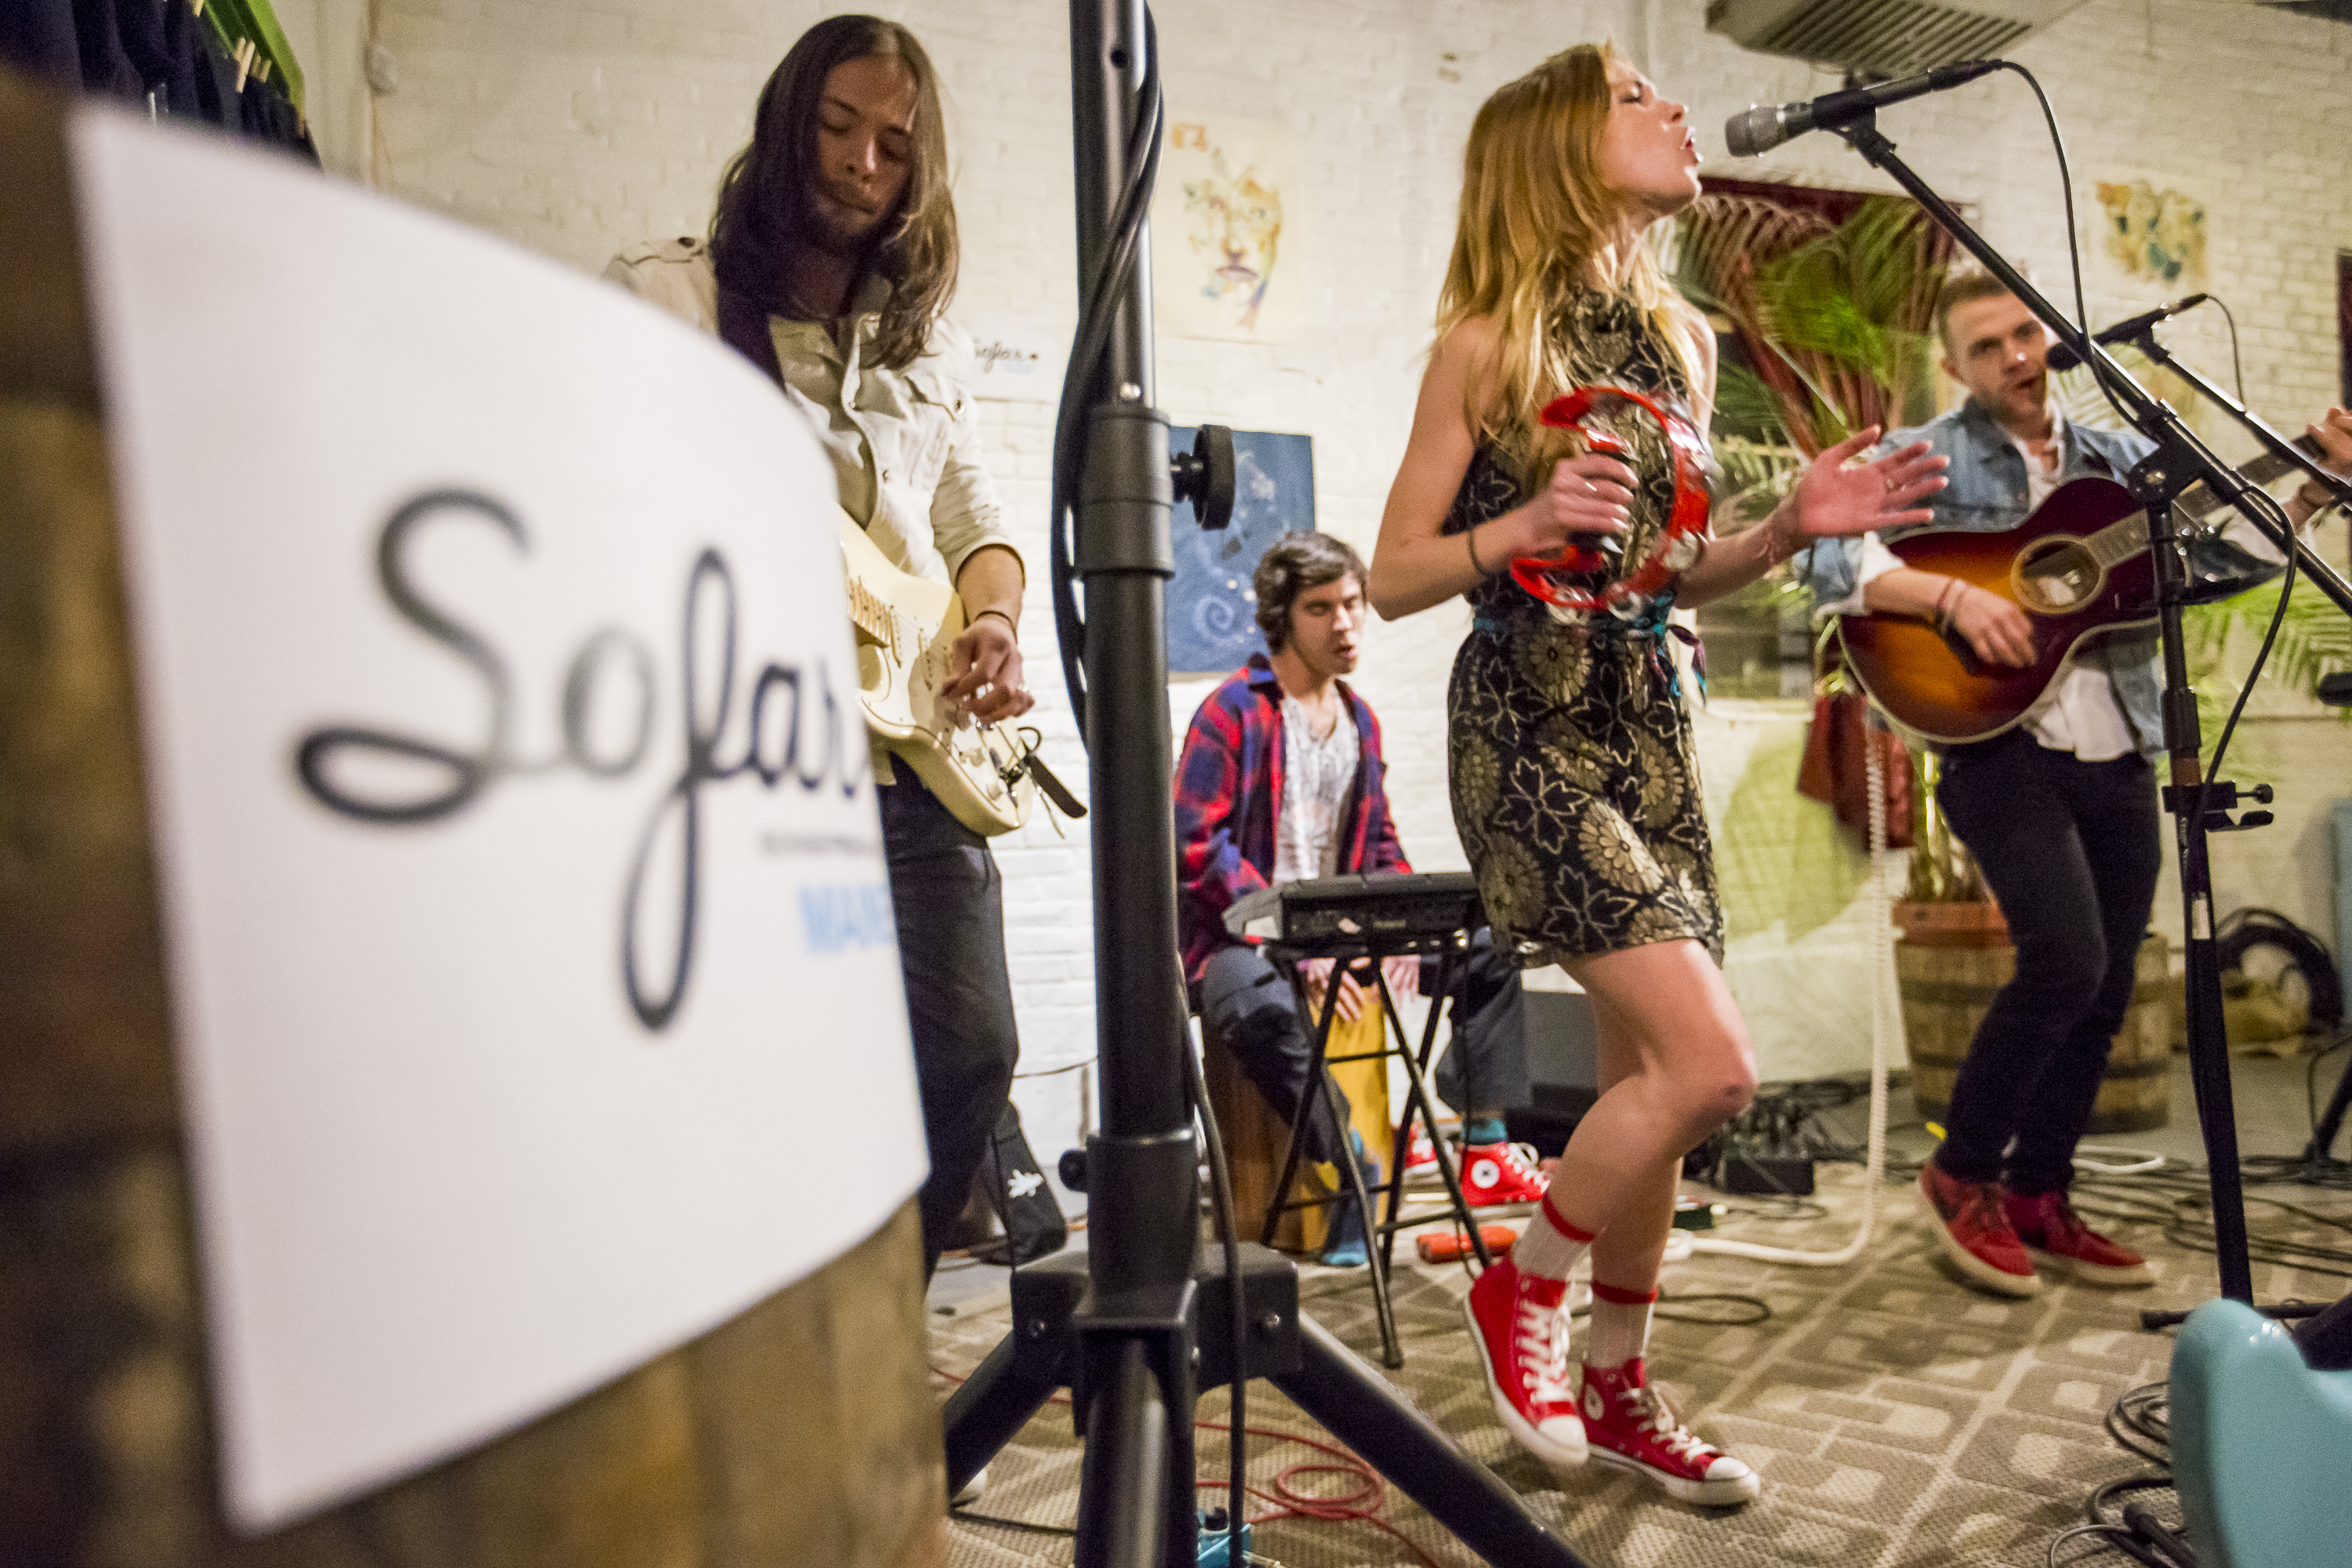 Music Events Startup Sofar Sounds Under Investigation by New York State Department of Labor: Report